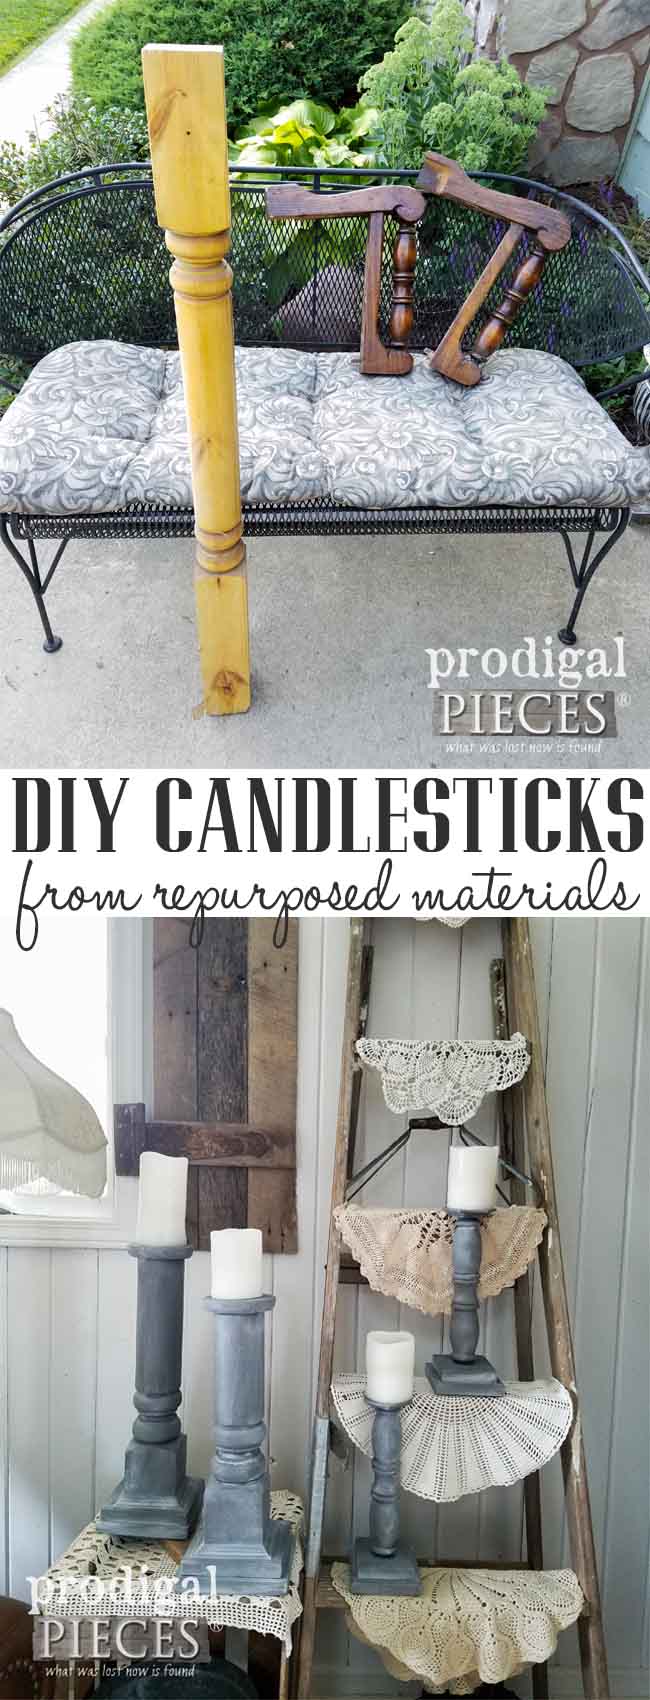 Create these DIY candlesticks using repurposed materials and this tutorial by Prodigal Pieces | prodigalpieces.com